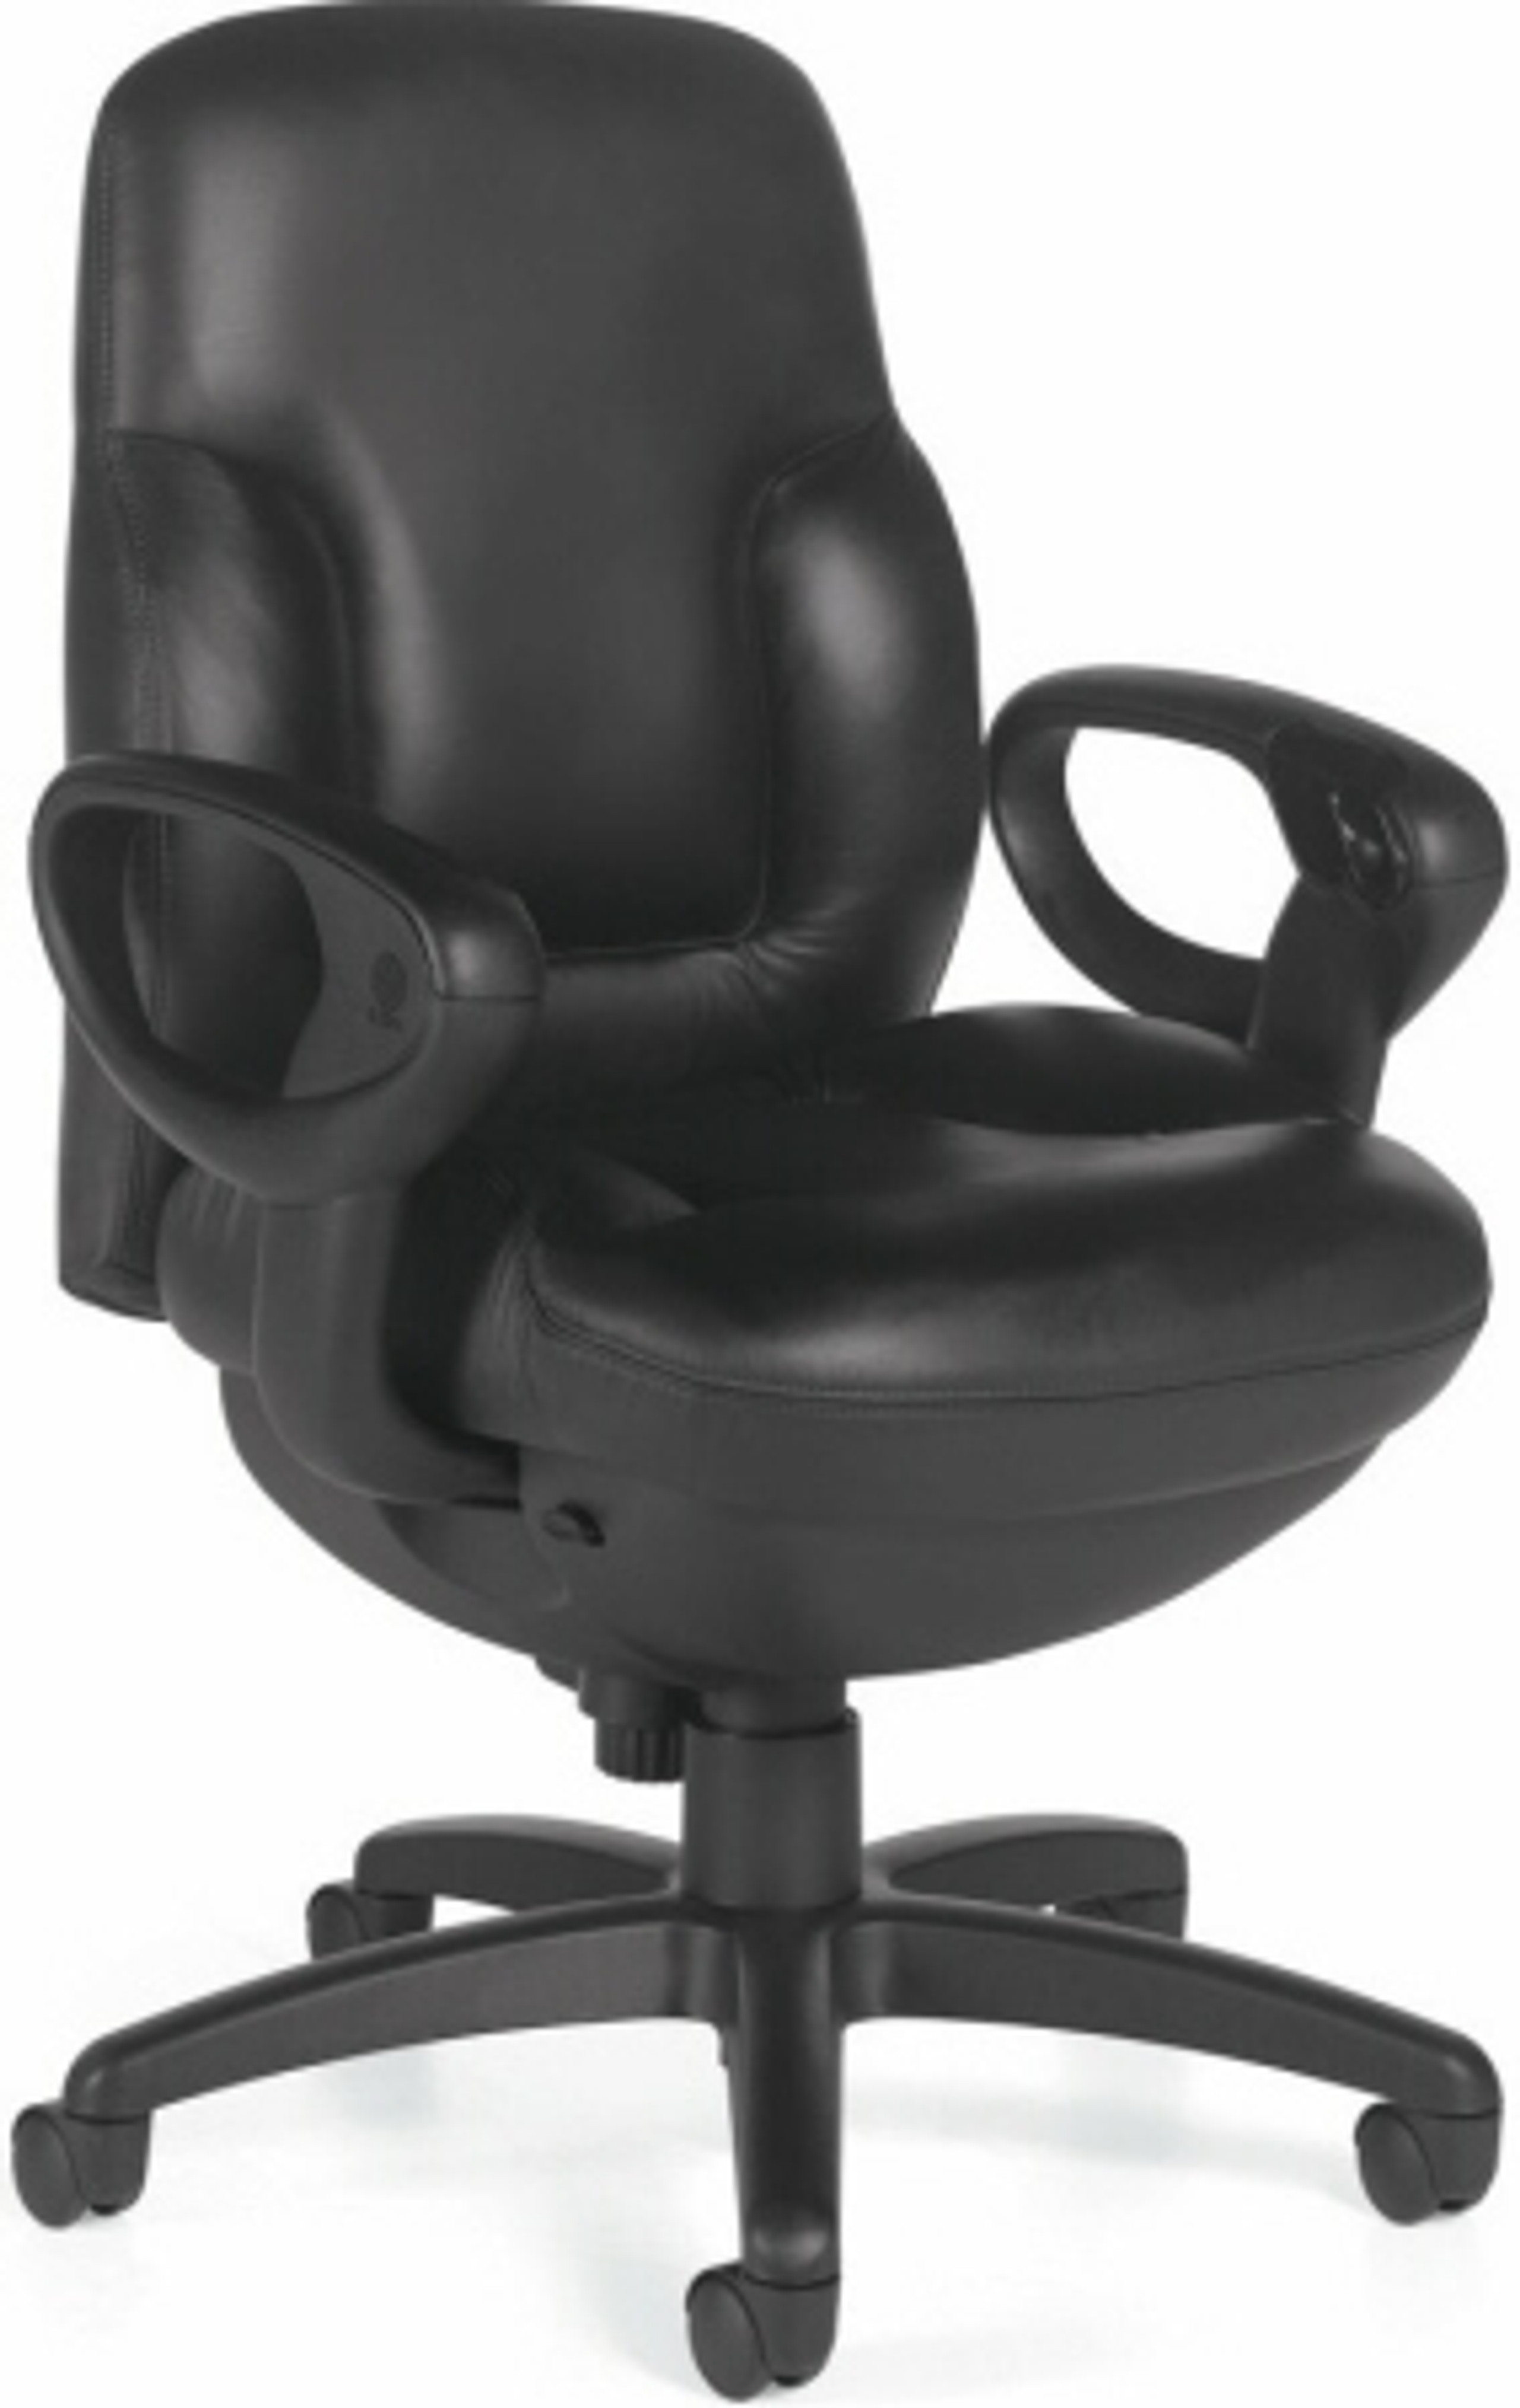 Global Concorde 24 Hour Low Back Chair 2425 18 1  06405.1425342196 ?c=2